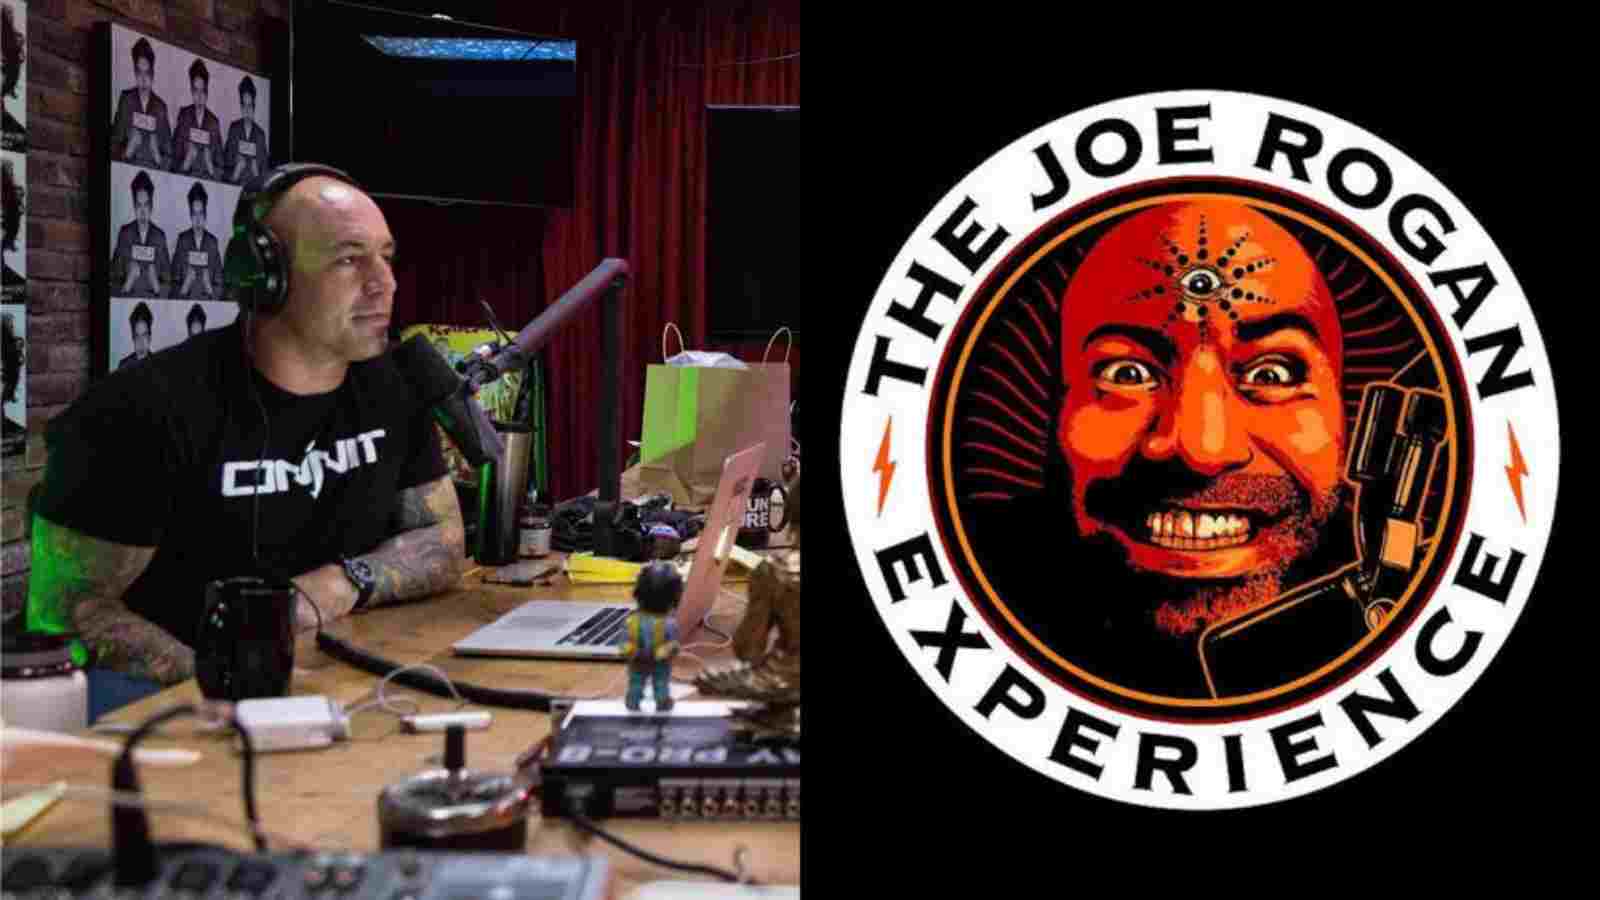 Joe Rogan's controversial podcast show, The Joe Rogan Experience' goes on no. 2 after Meghan Markle's podcast got released